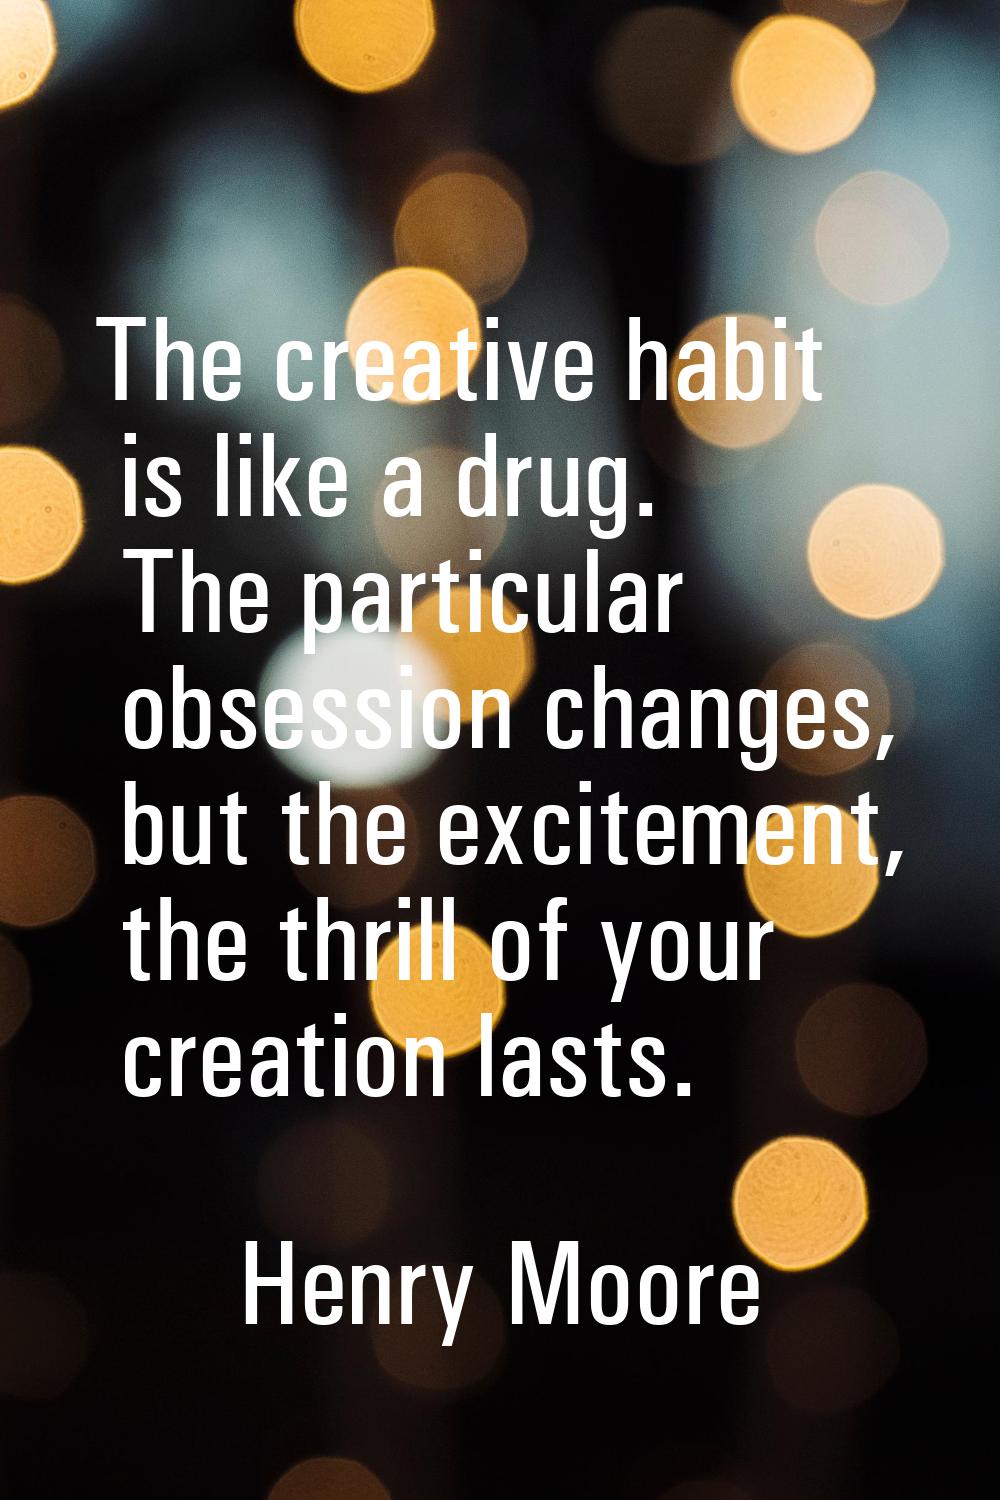 The creative habit is like a drug. The particular obsession changes, but the excitement, the thrill